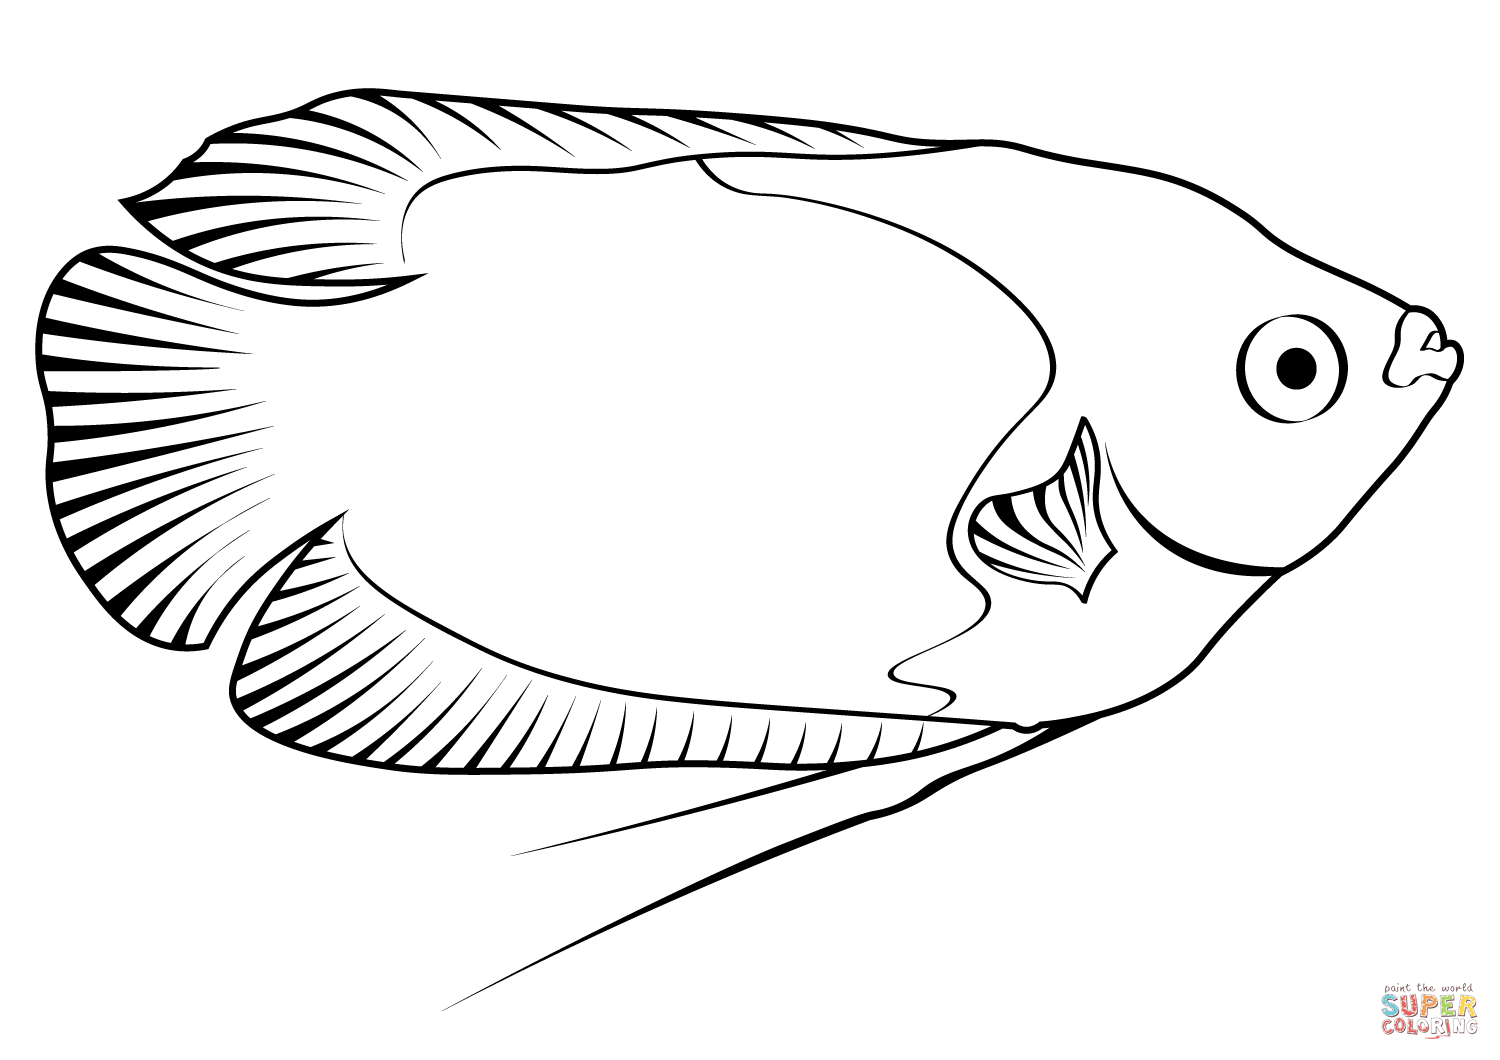 Honey gourami trichogaster chuna coloring page free printable coloring pages